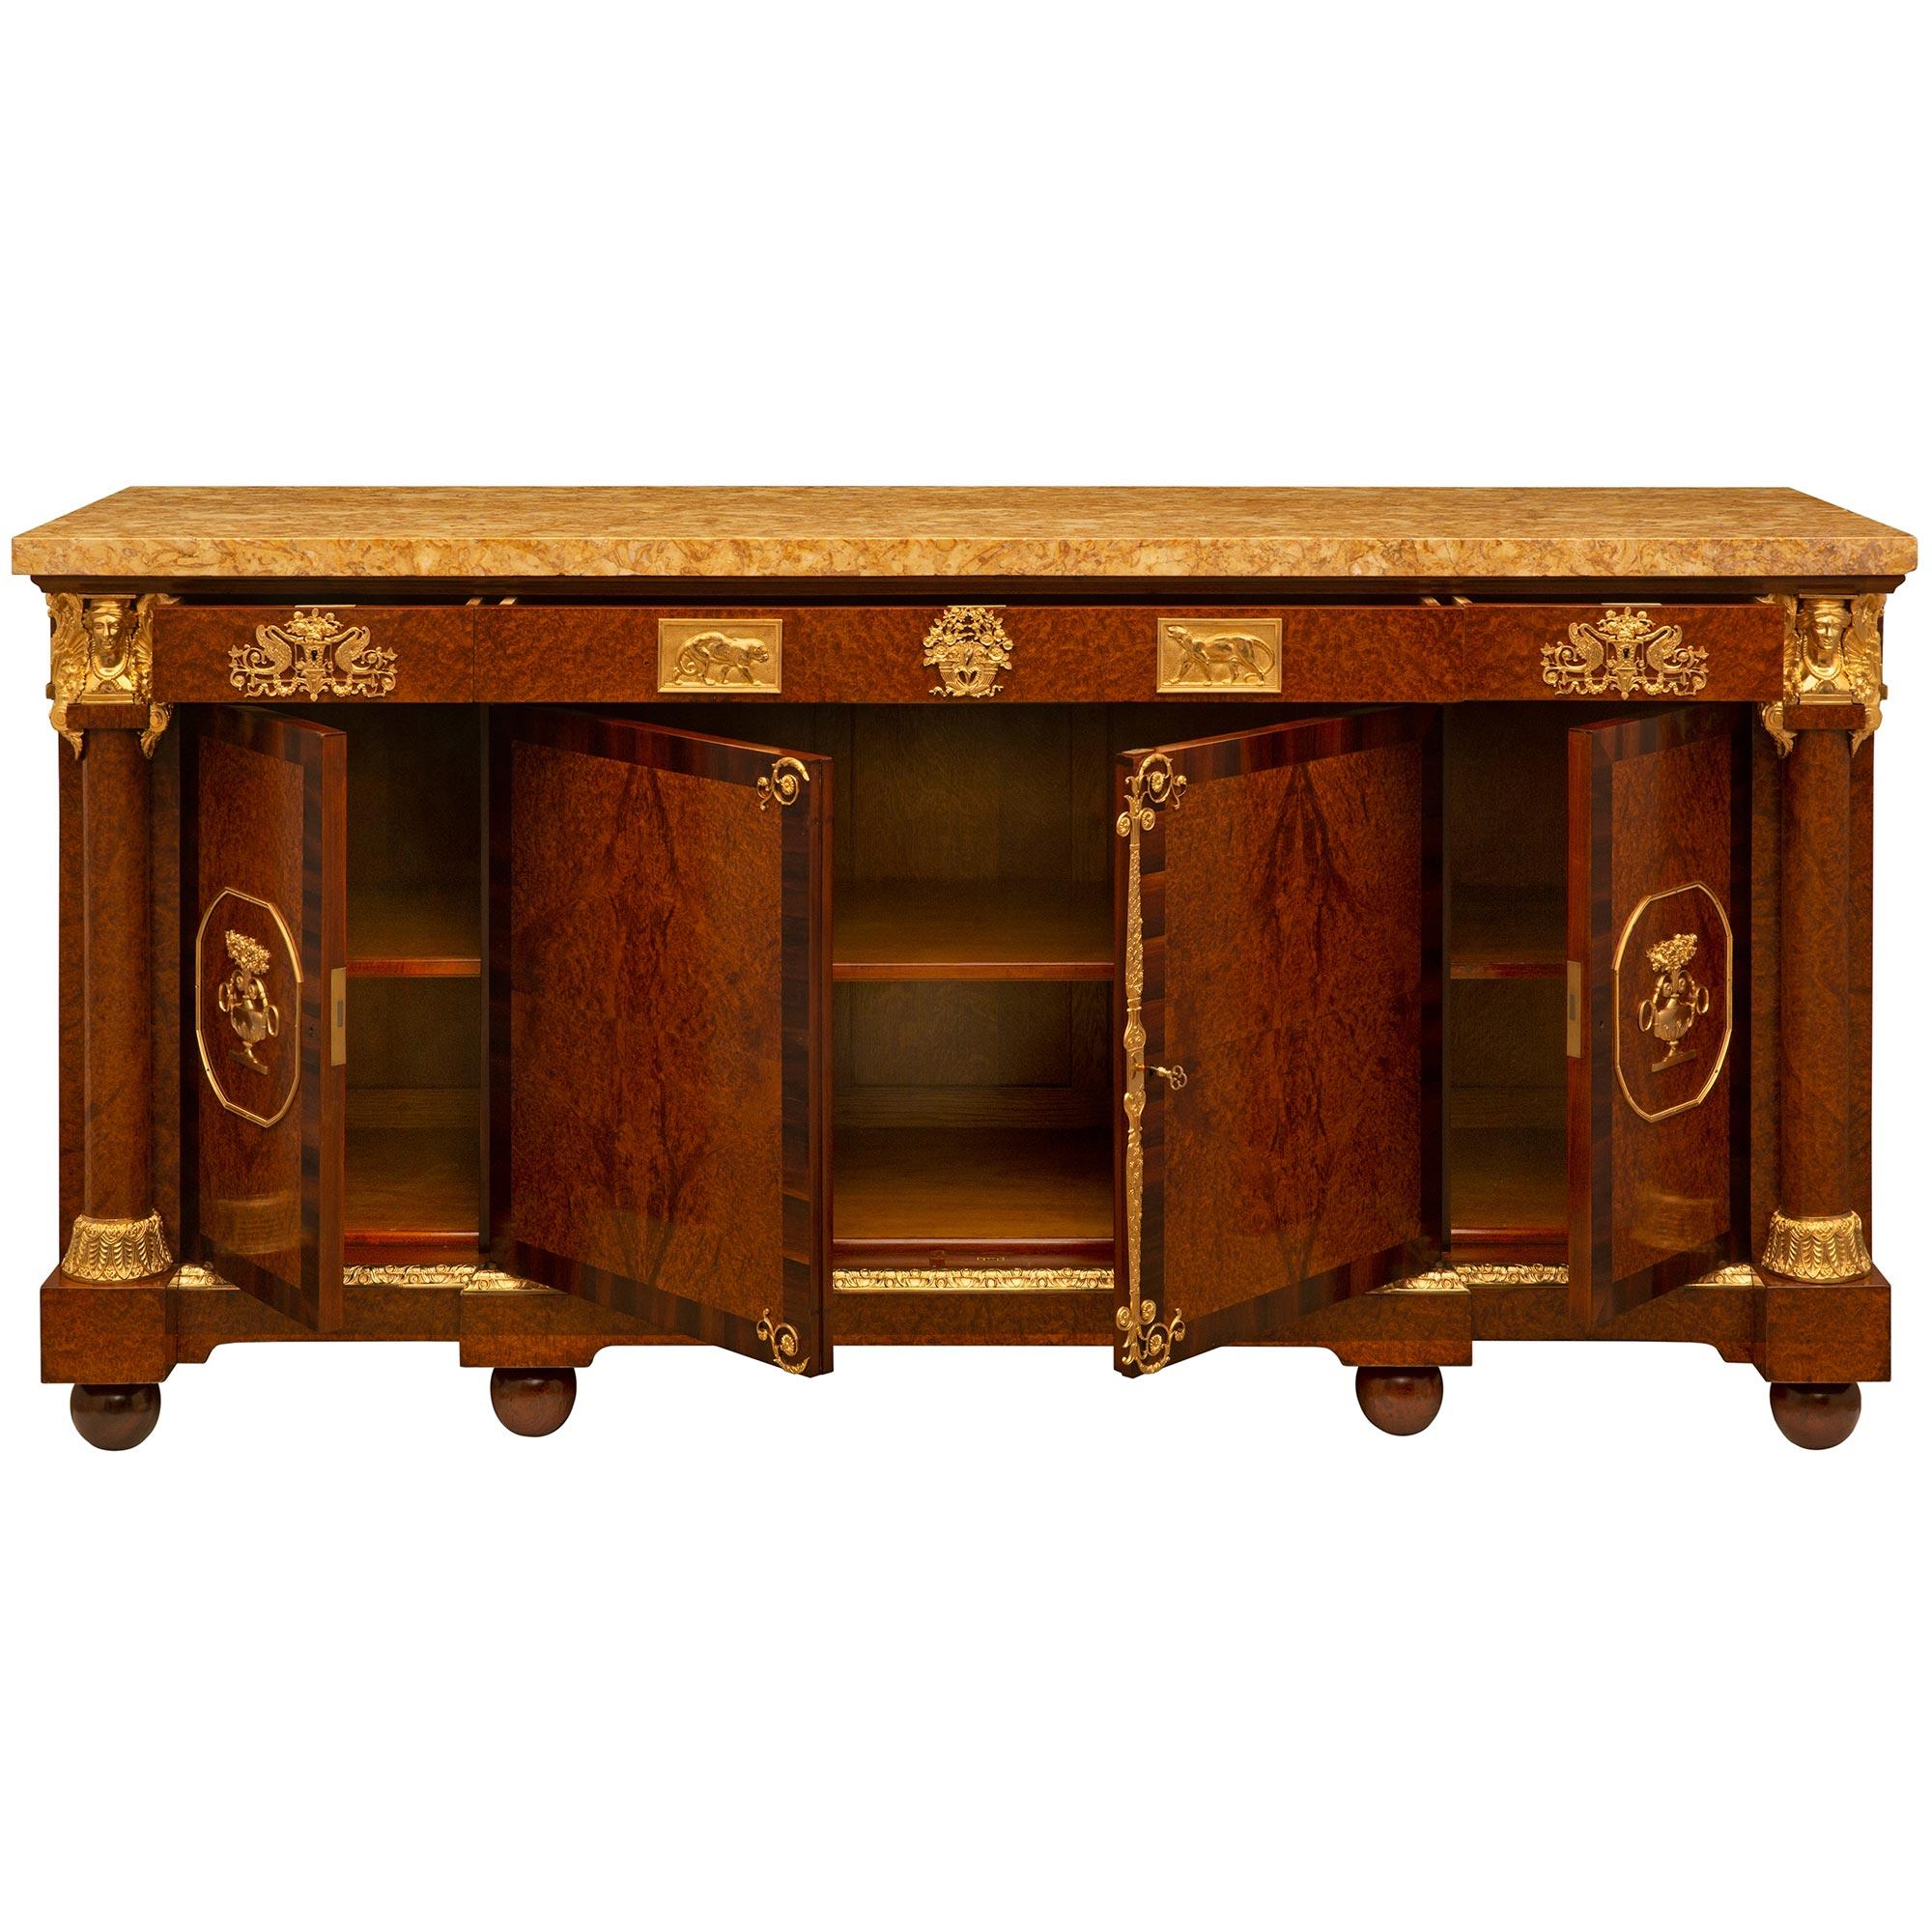 An impressive and extremely high quality French 19th century neo-classical st. burl Walnut, ormolu, and Brocatelle Jaune du Jura marble buffet attributed to Maison Krieger. The four door three drawer buffet is raised by elegant ball feet below a